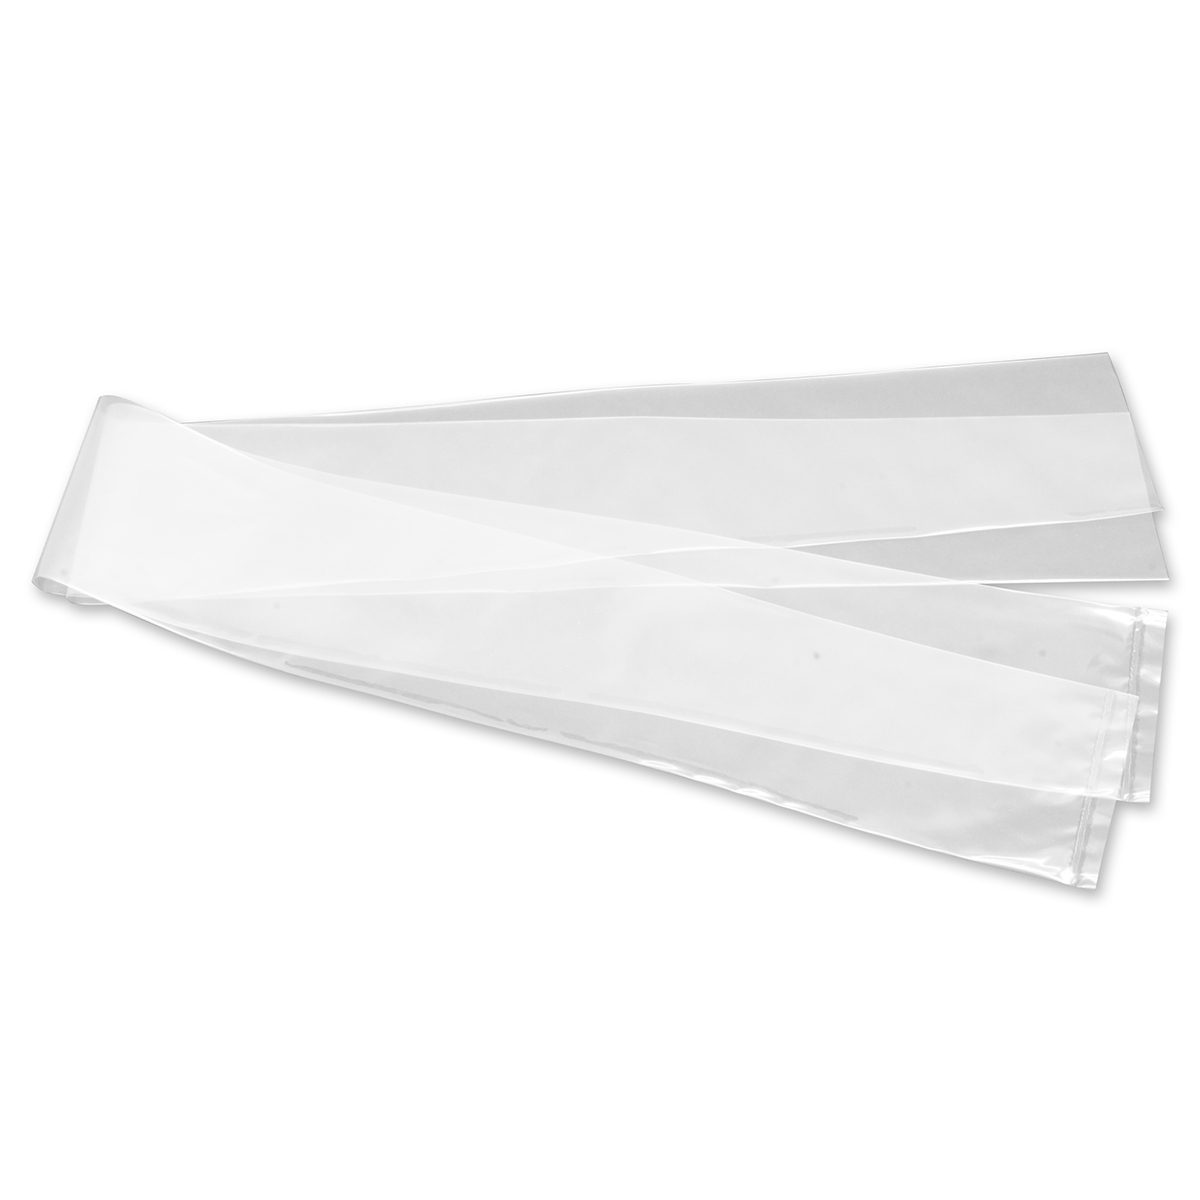 Dust Proof Bags Image